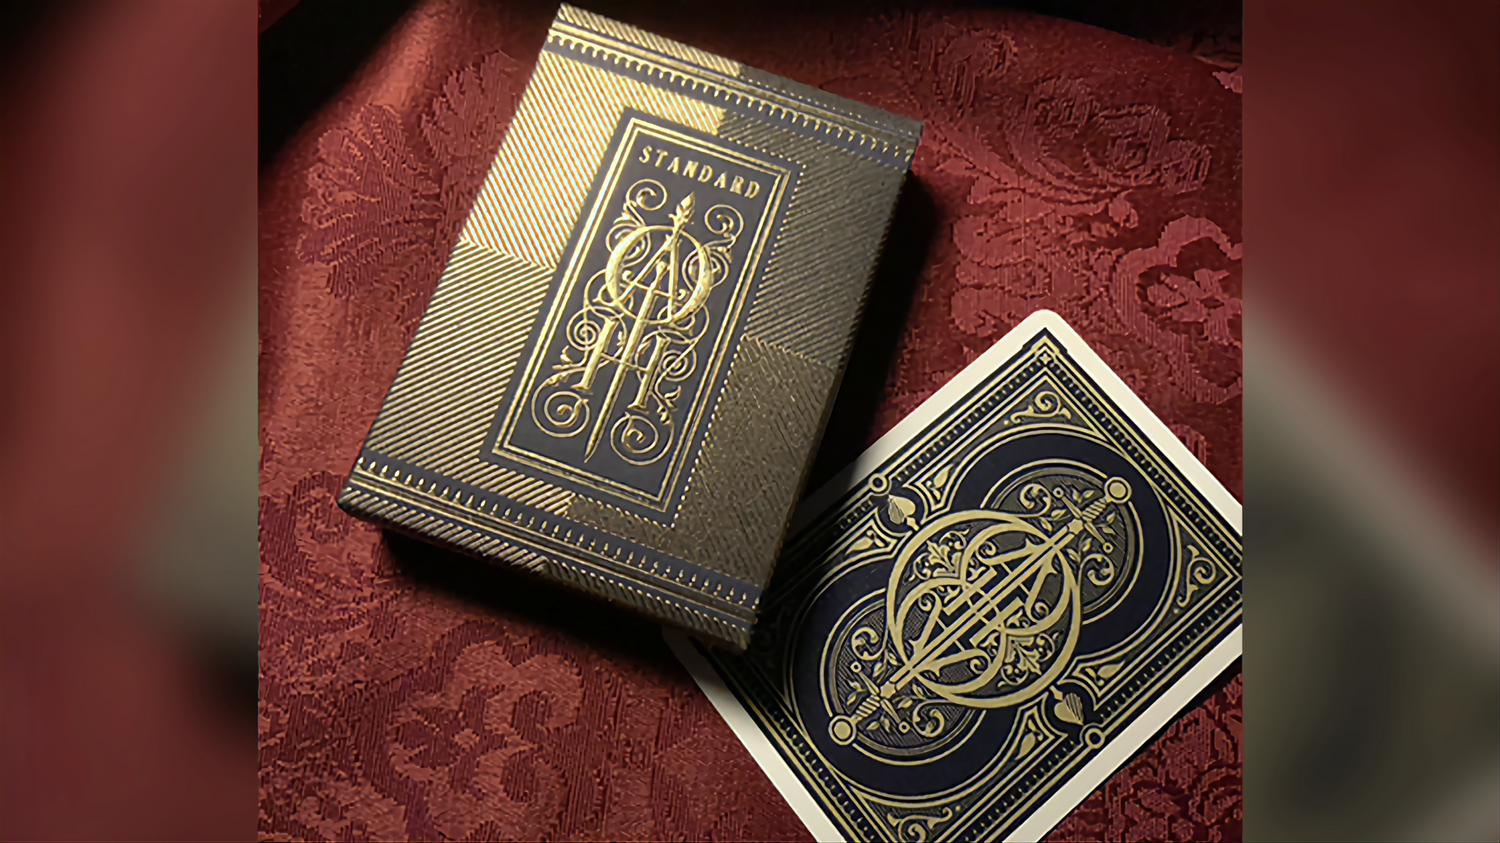 Oath Standard (Navy Blue) by Lotrek : Playing Cards, Poker, Magic, Cardistry,singapore